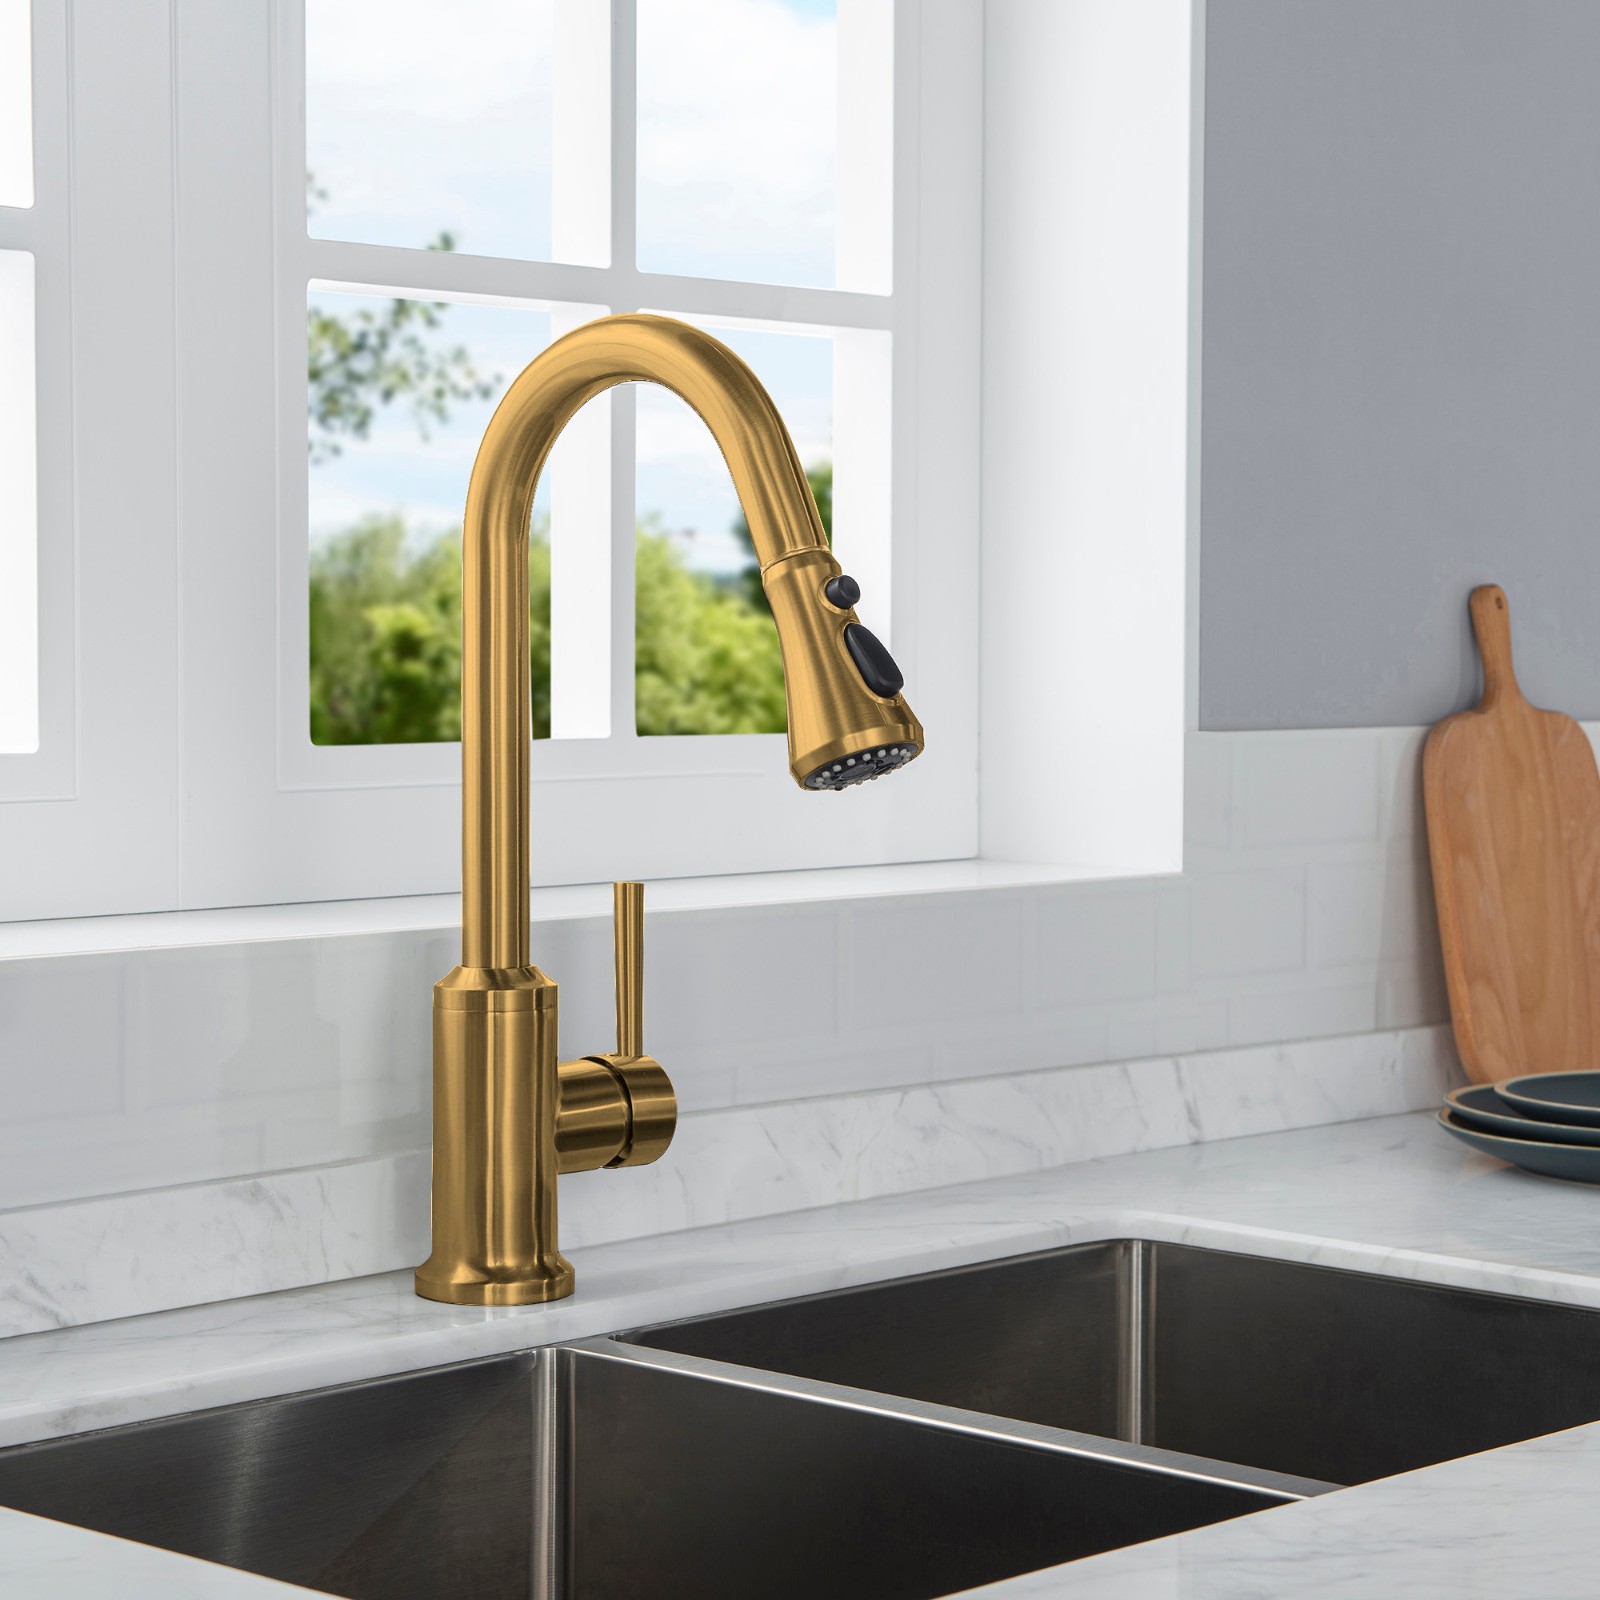  WOODBRIDGE WK101201BG Stainless Steel Single Handle Pull Down Kitchen Faucet in Brushed Gold Finish._4982